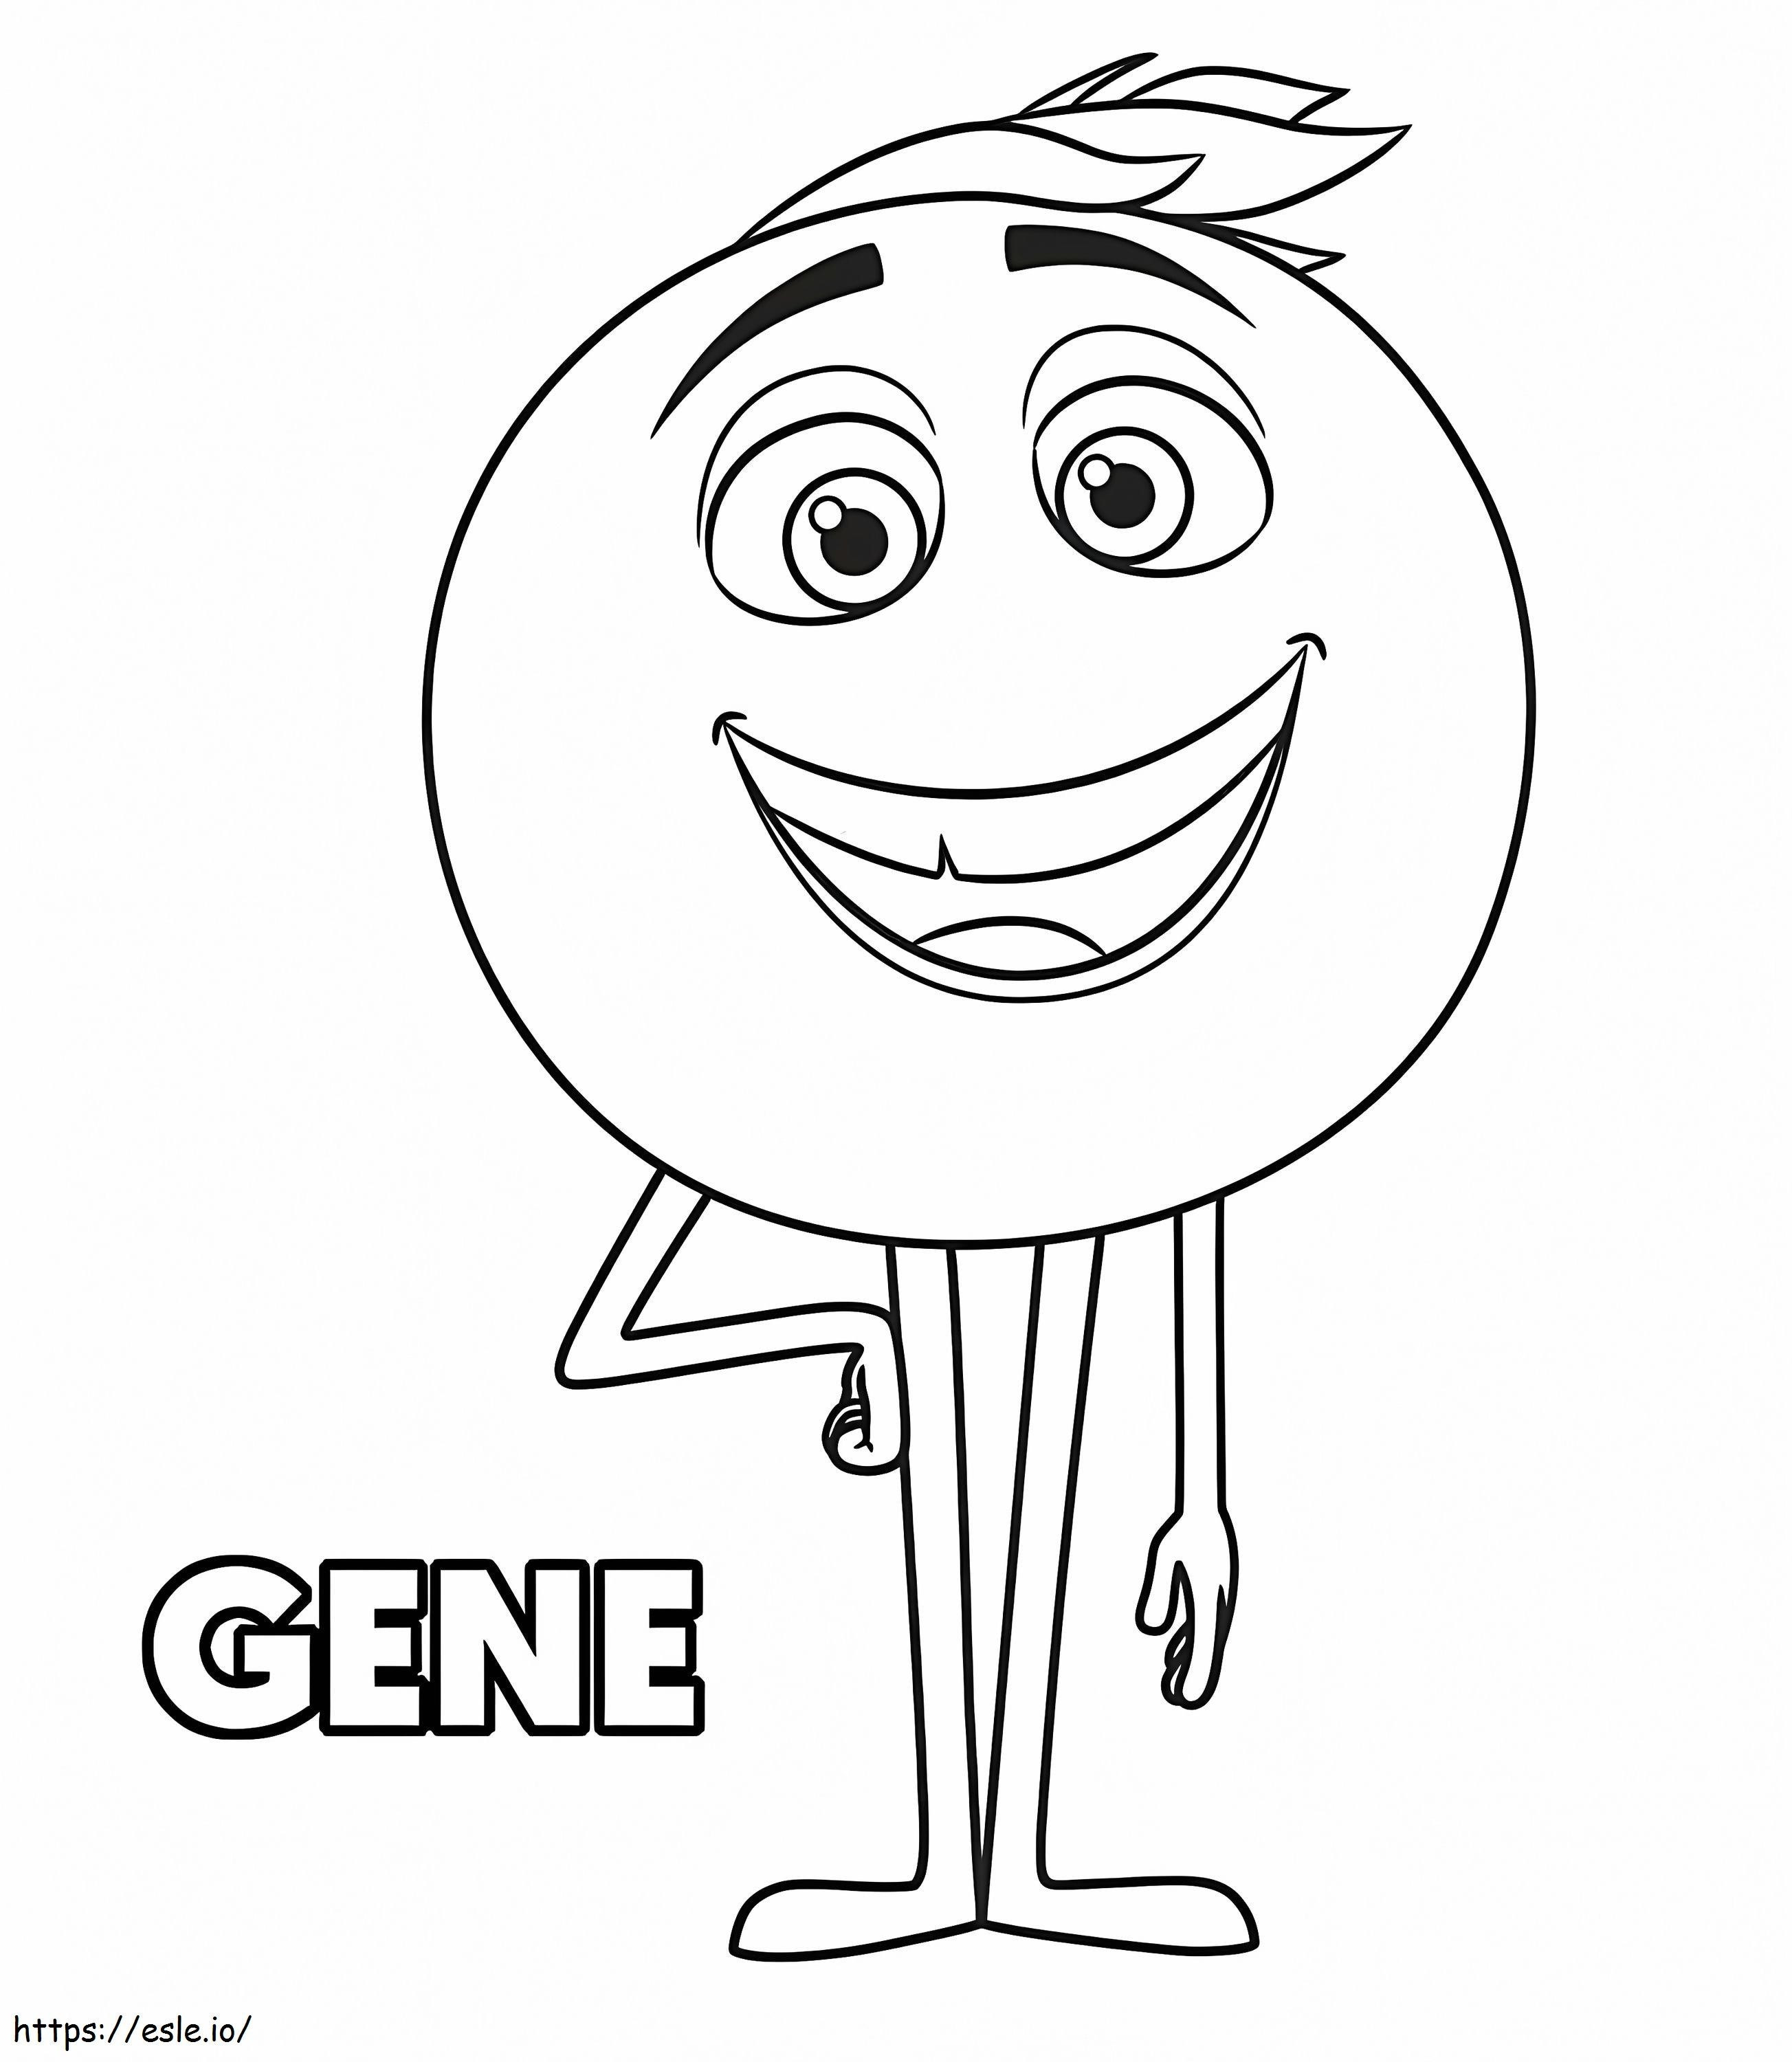 Gene In The Emoji Movie coloring page